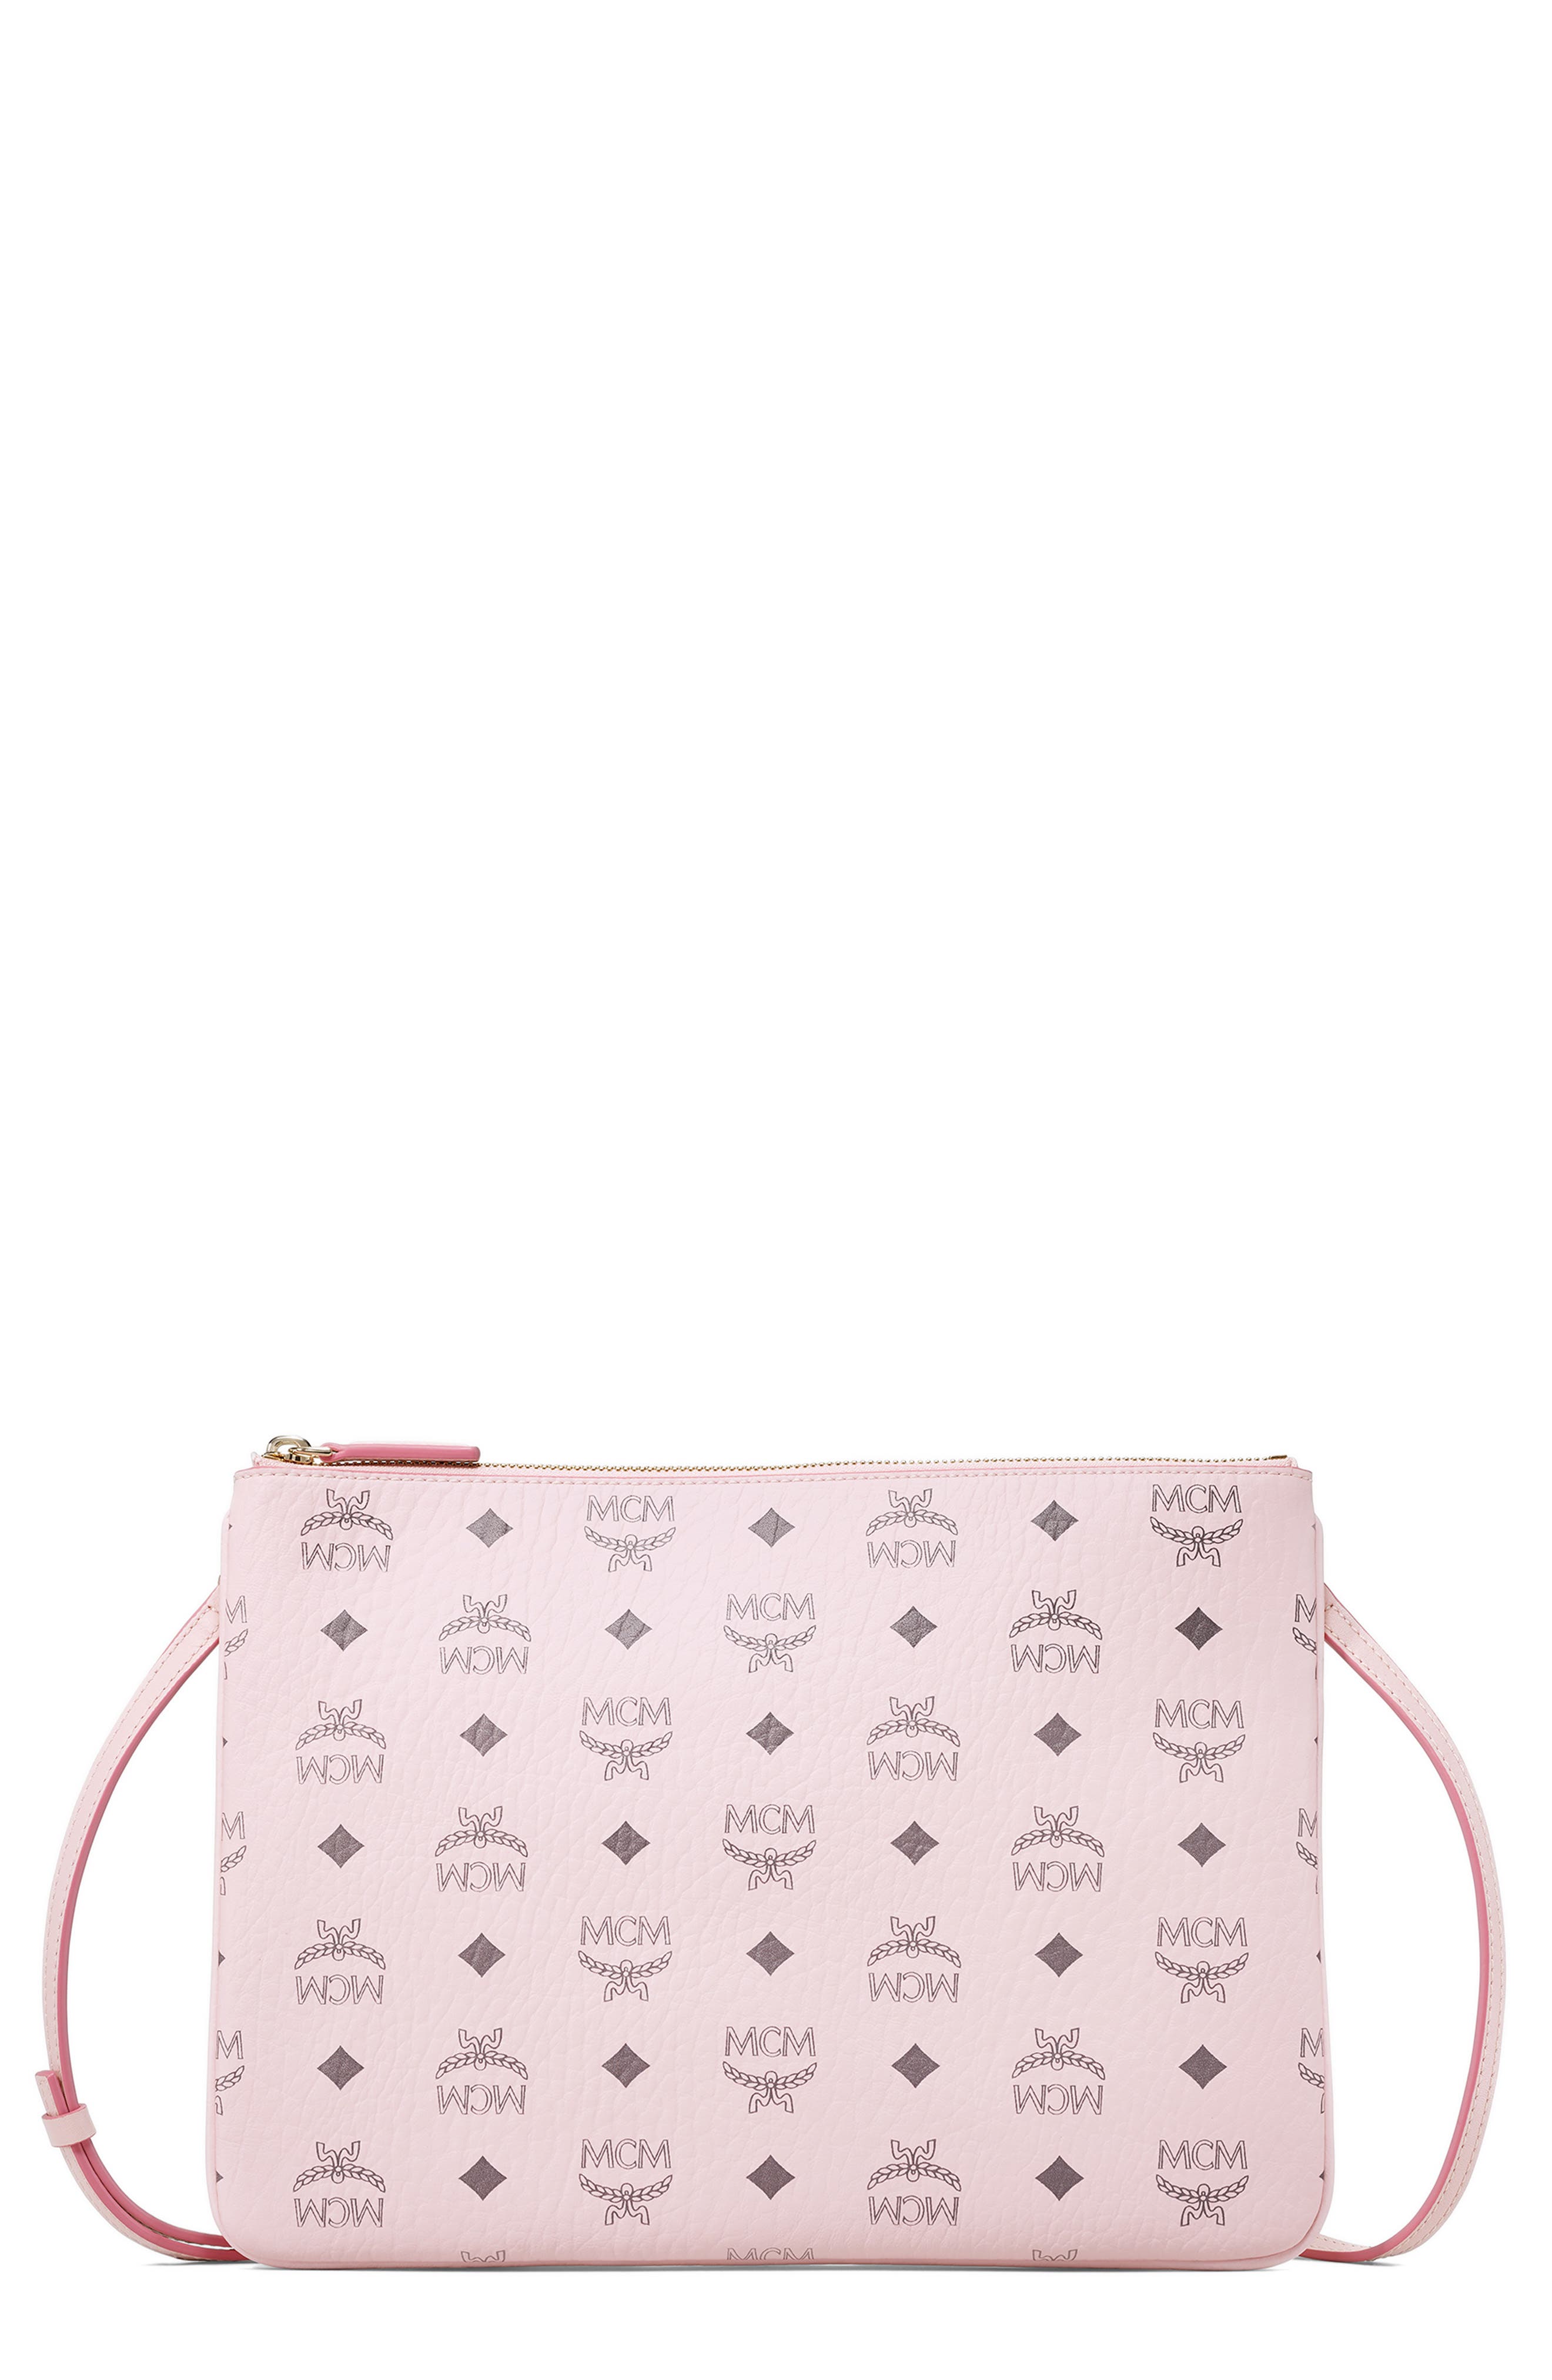 Ladies Clutch/Hand/Shoulder Bag-Baby Pink with Sequins><Free> P&P 2UK>>1st Class